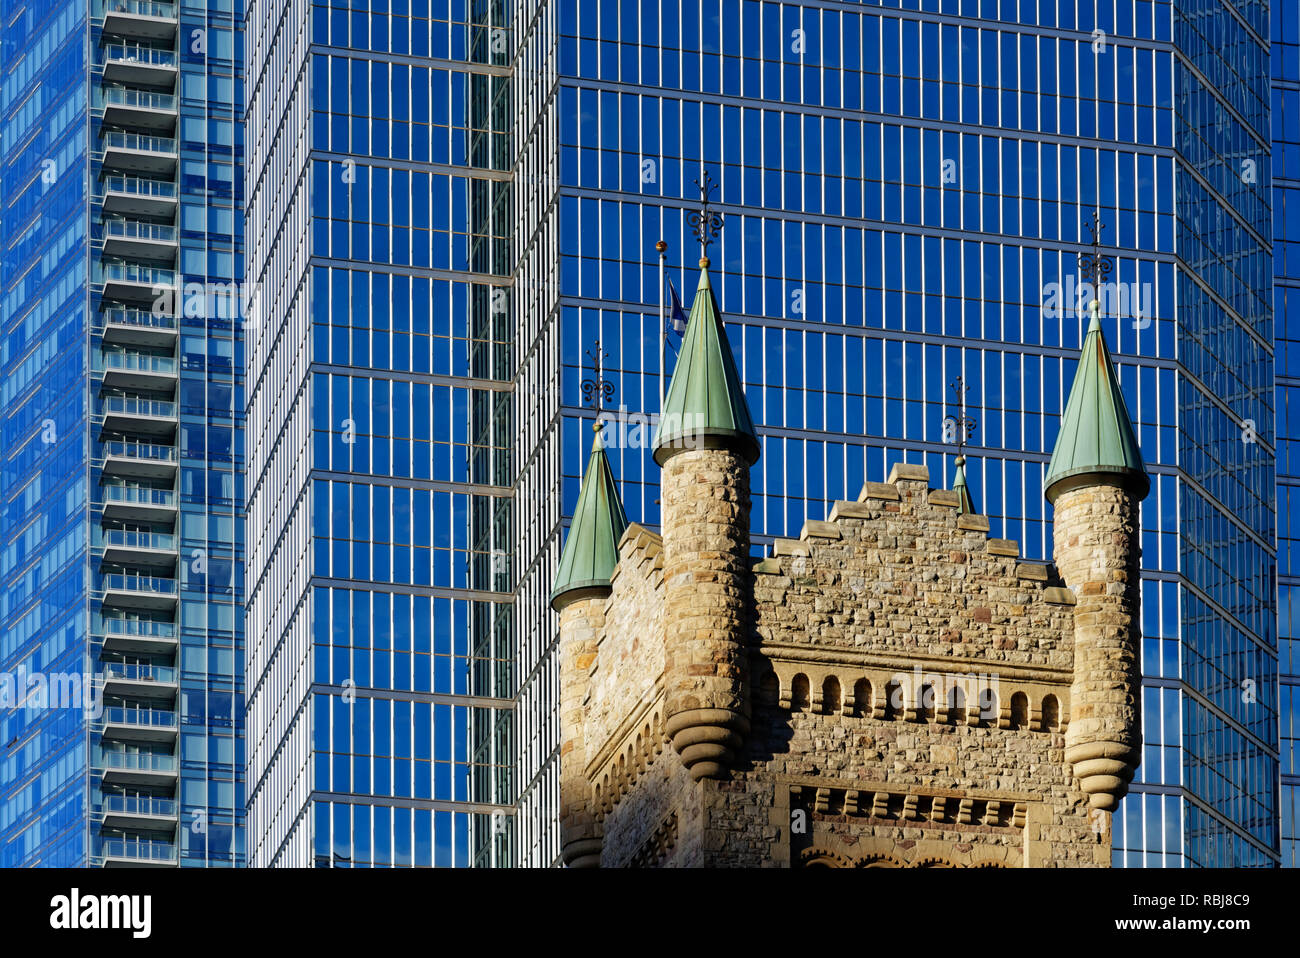 The Tower of St Andrew's Church in Toronto with the Bank of Montreal (BMO) Building behind Stock Photo